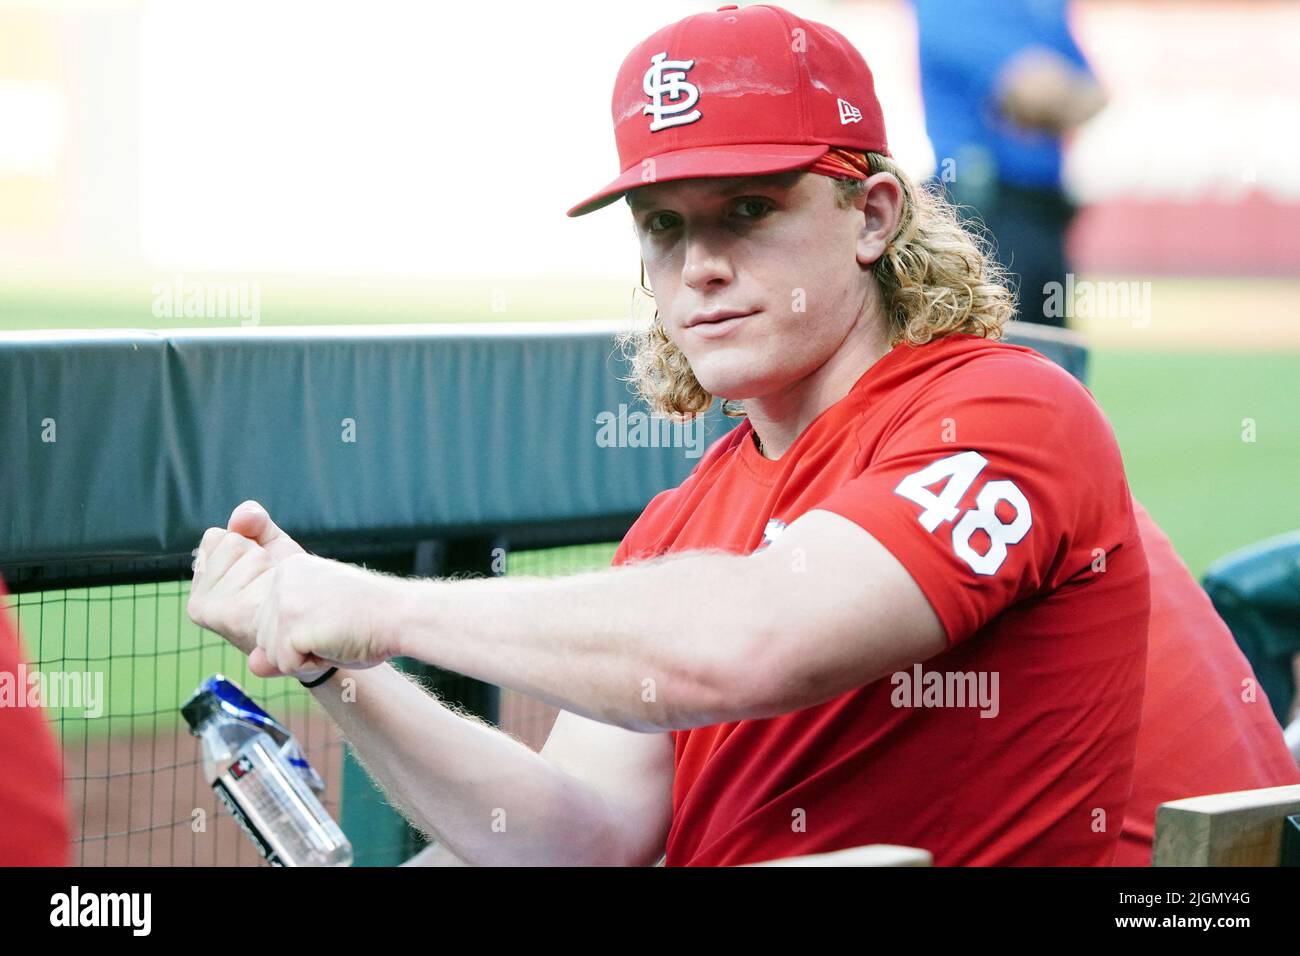 St. Louis, United States. 11th July, 2022. St. Louis Cardinals centerfielder Harrison Bader practices his hitting swing while sitting in the dugout during a game against the Philadelphia Phillies at Busch Stadium in St. Louis on Monday, July 11, 2022. Bader remains on the bench with Plantar Fasciitis. Photo by Bill Greenblatt/UPI Credit: UPI/Alamy Live News Stock Photo